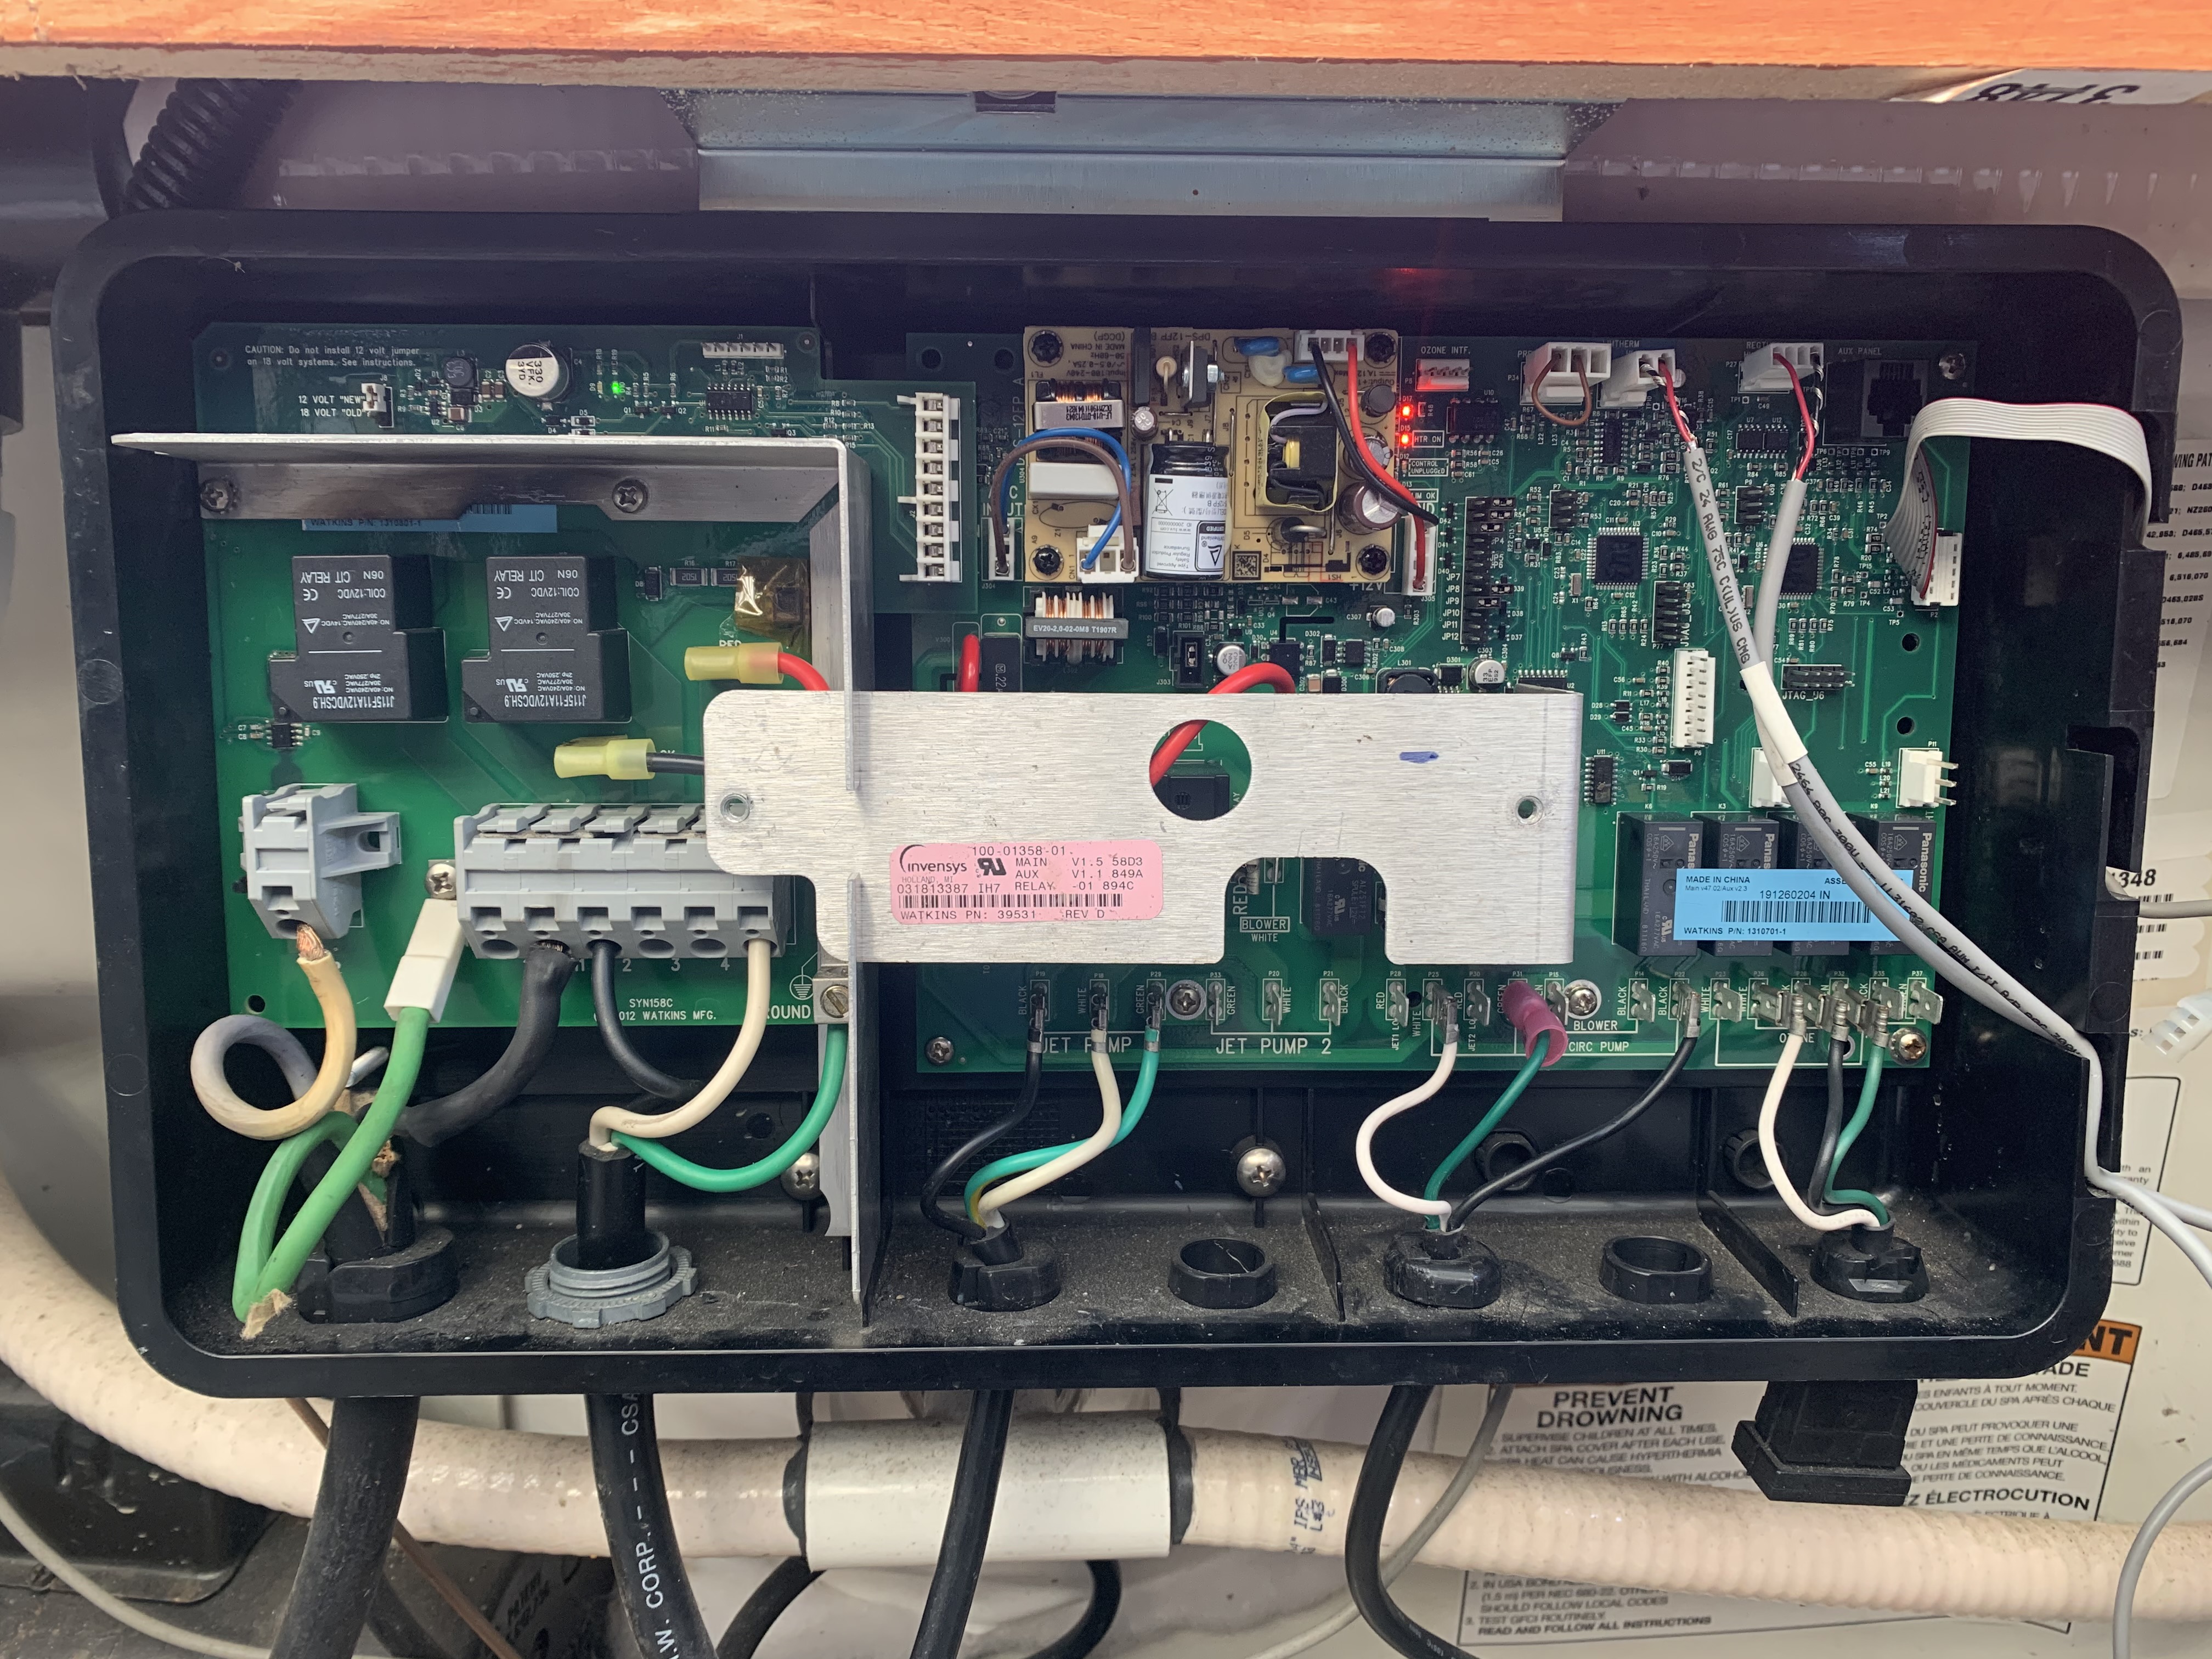 Tiger River iq2020 troubleshooting - Portable Hot Tubs & Spas - Pool and Spa  Forum  Iq 2020 Spa Control System Wiring Diagram    Pool Spa Forum